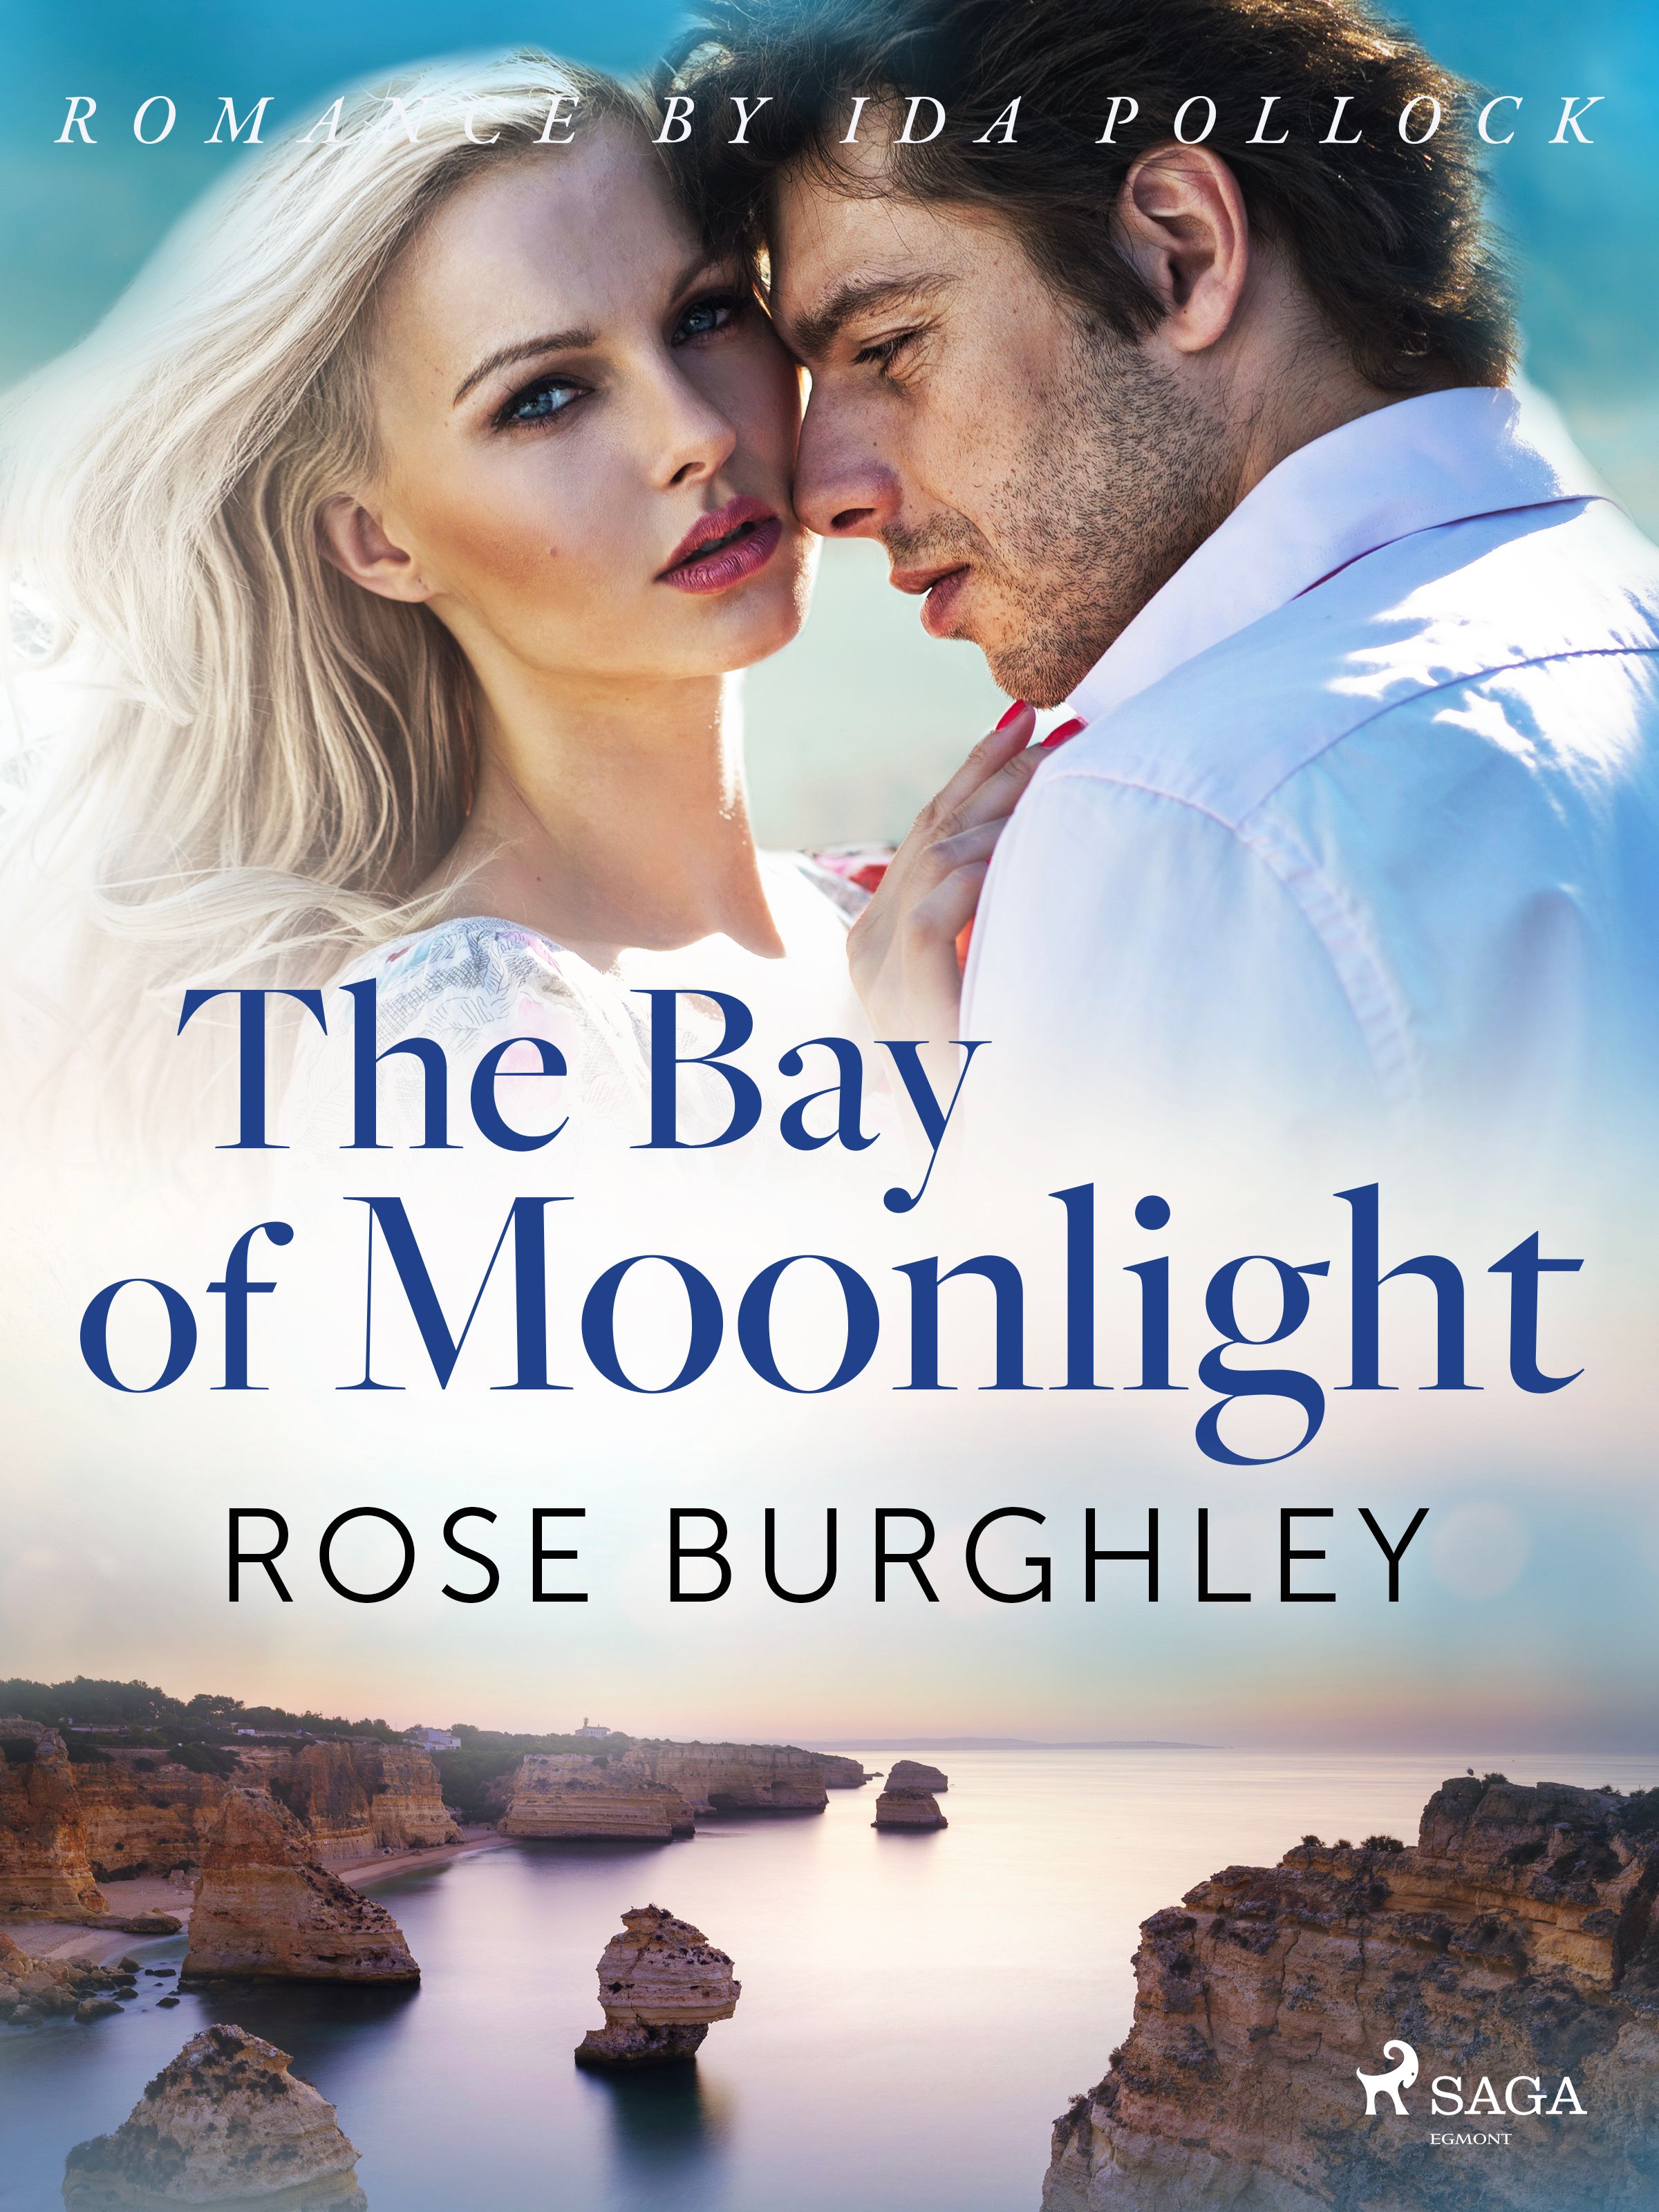 The Bay of Moonlight, eBook by Rose Burghley